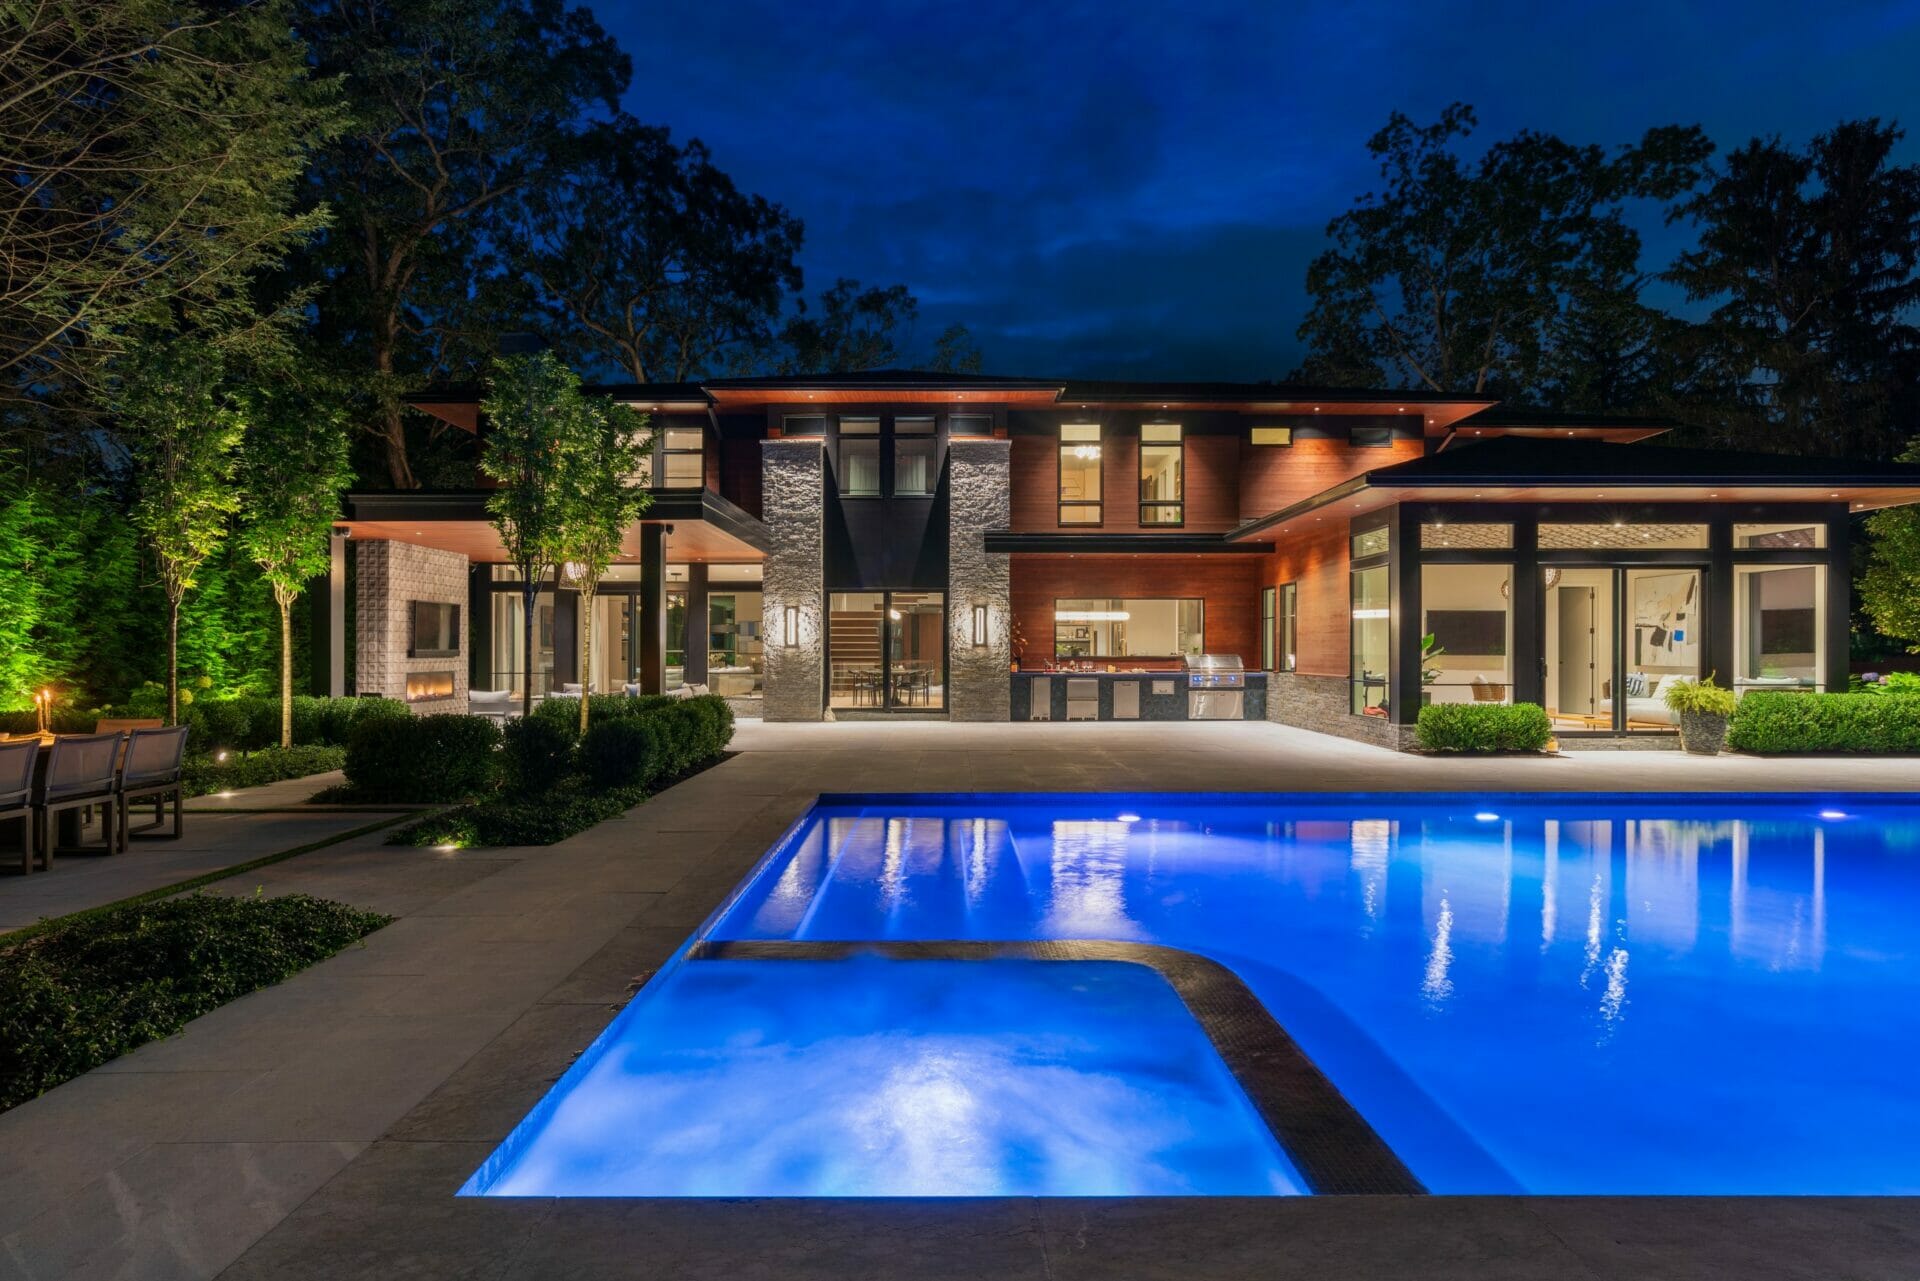 A pool at night with a beautiful home in the background.